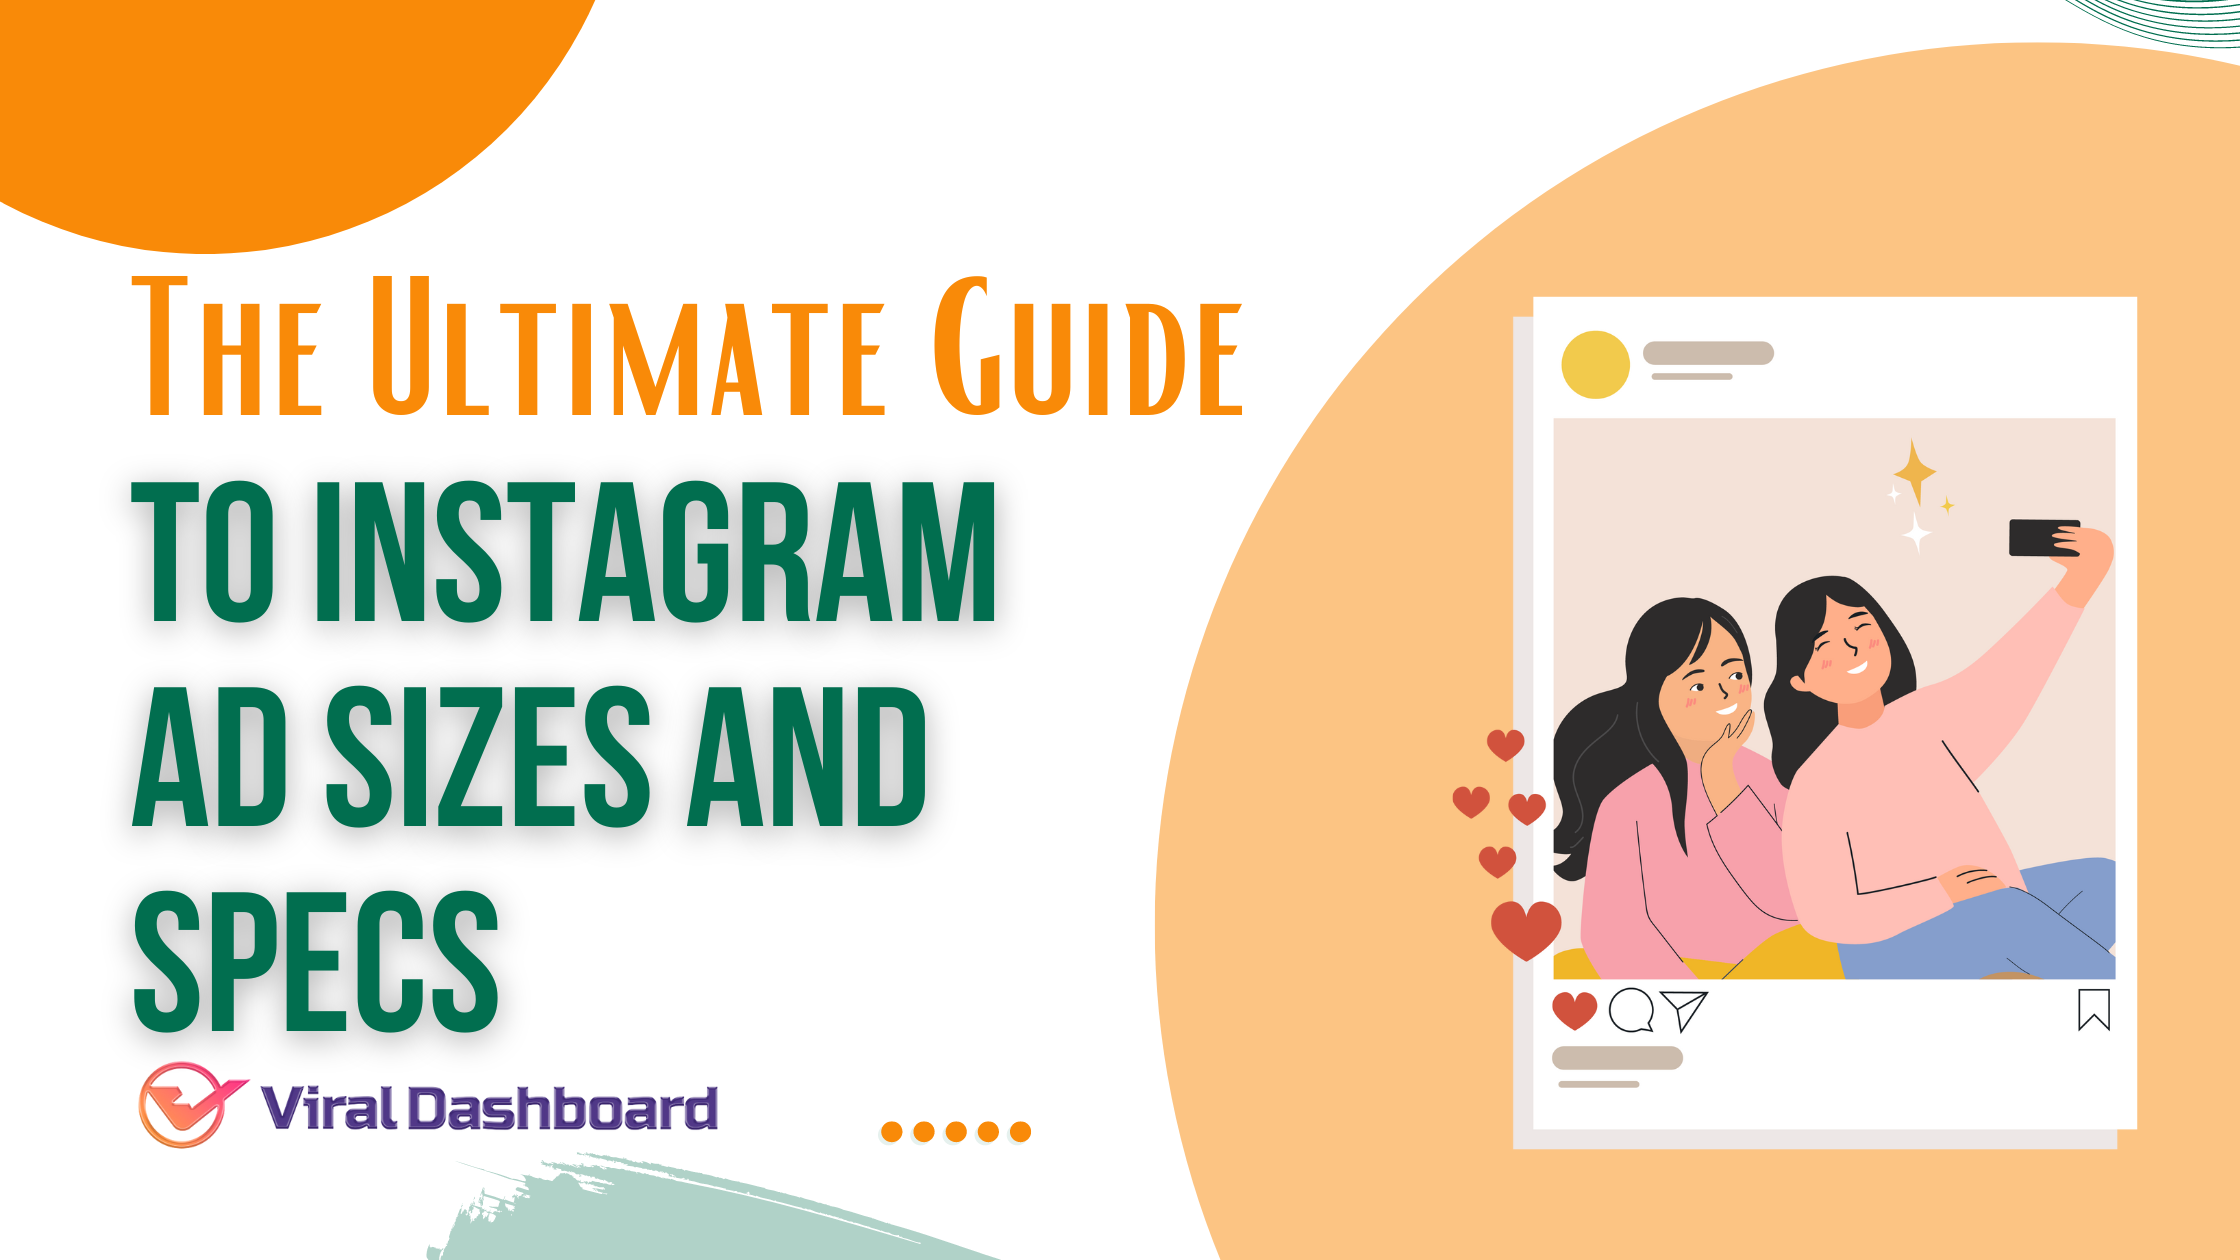 The Ultimate Guide to Instagram Ad Sizes and Specs